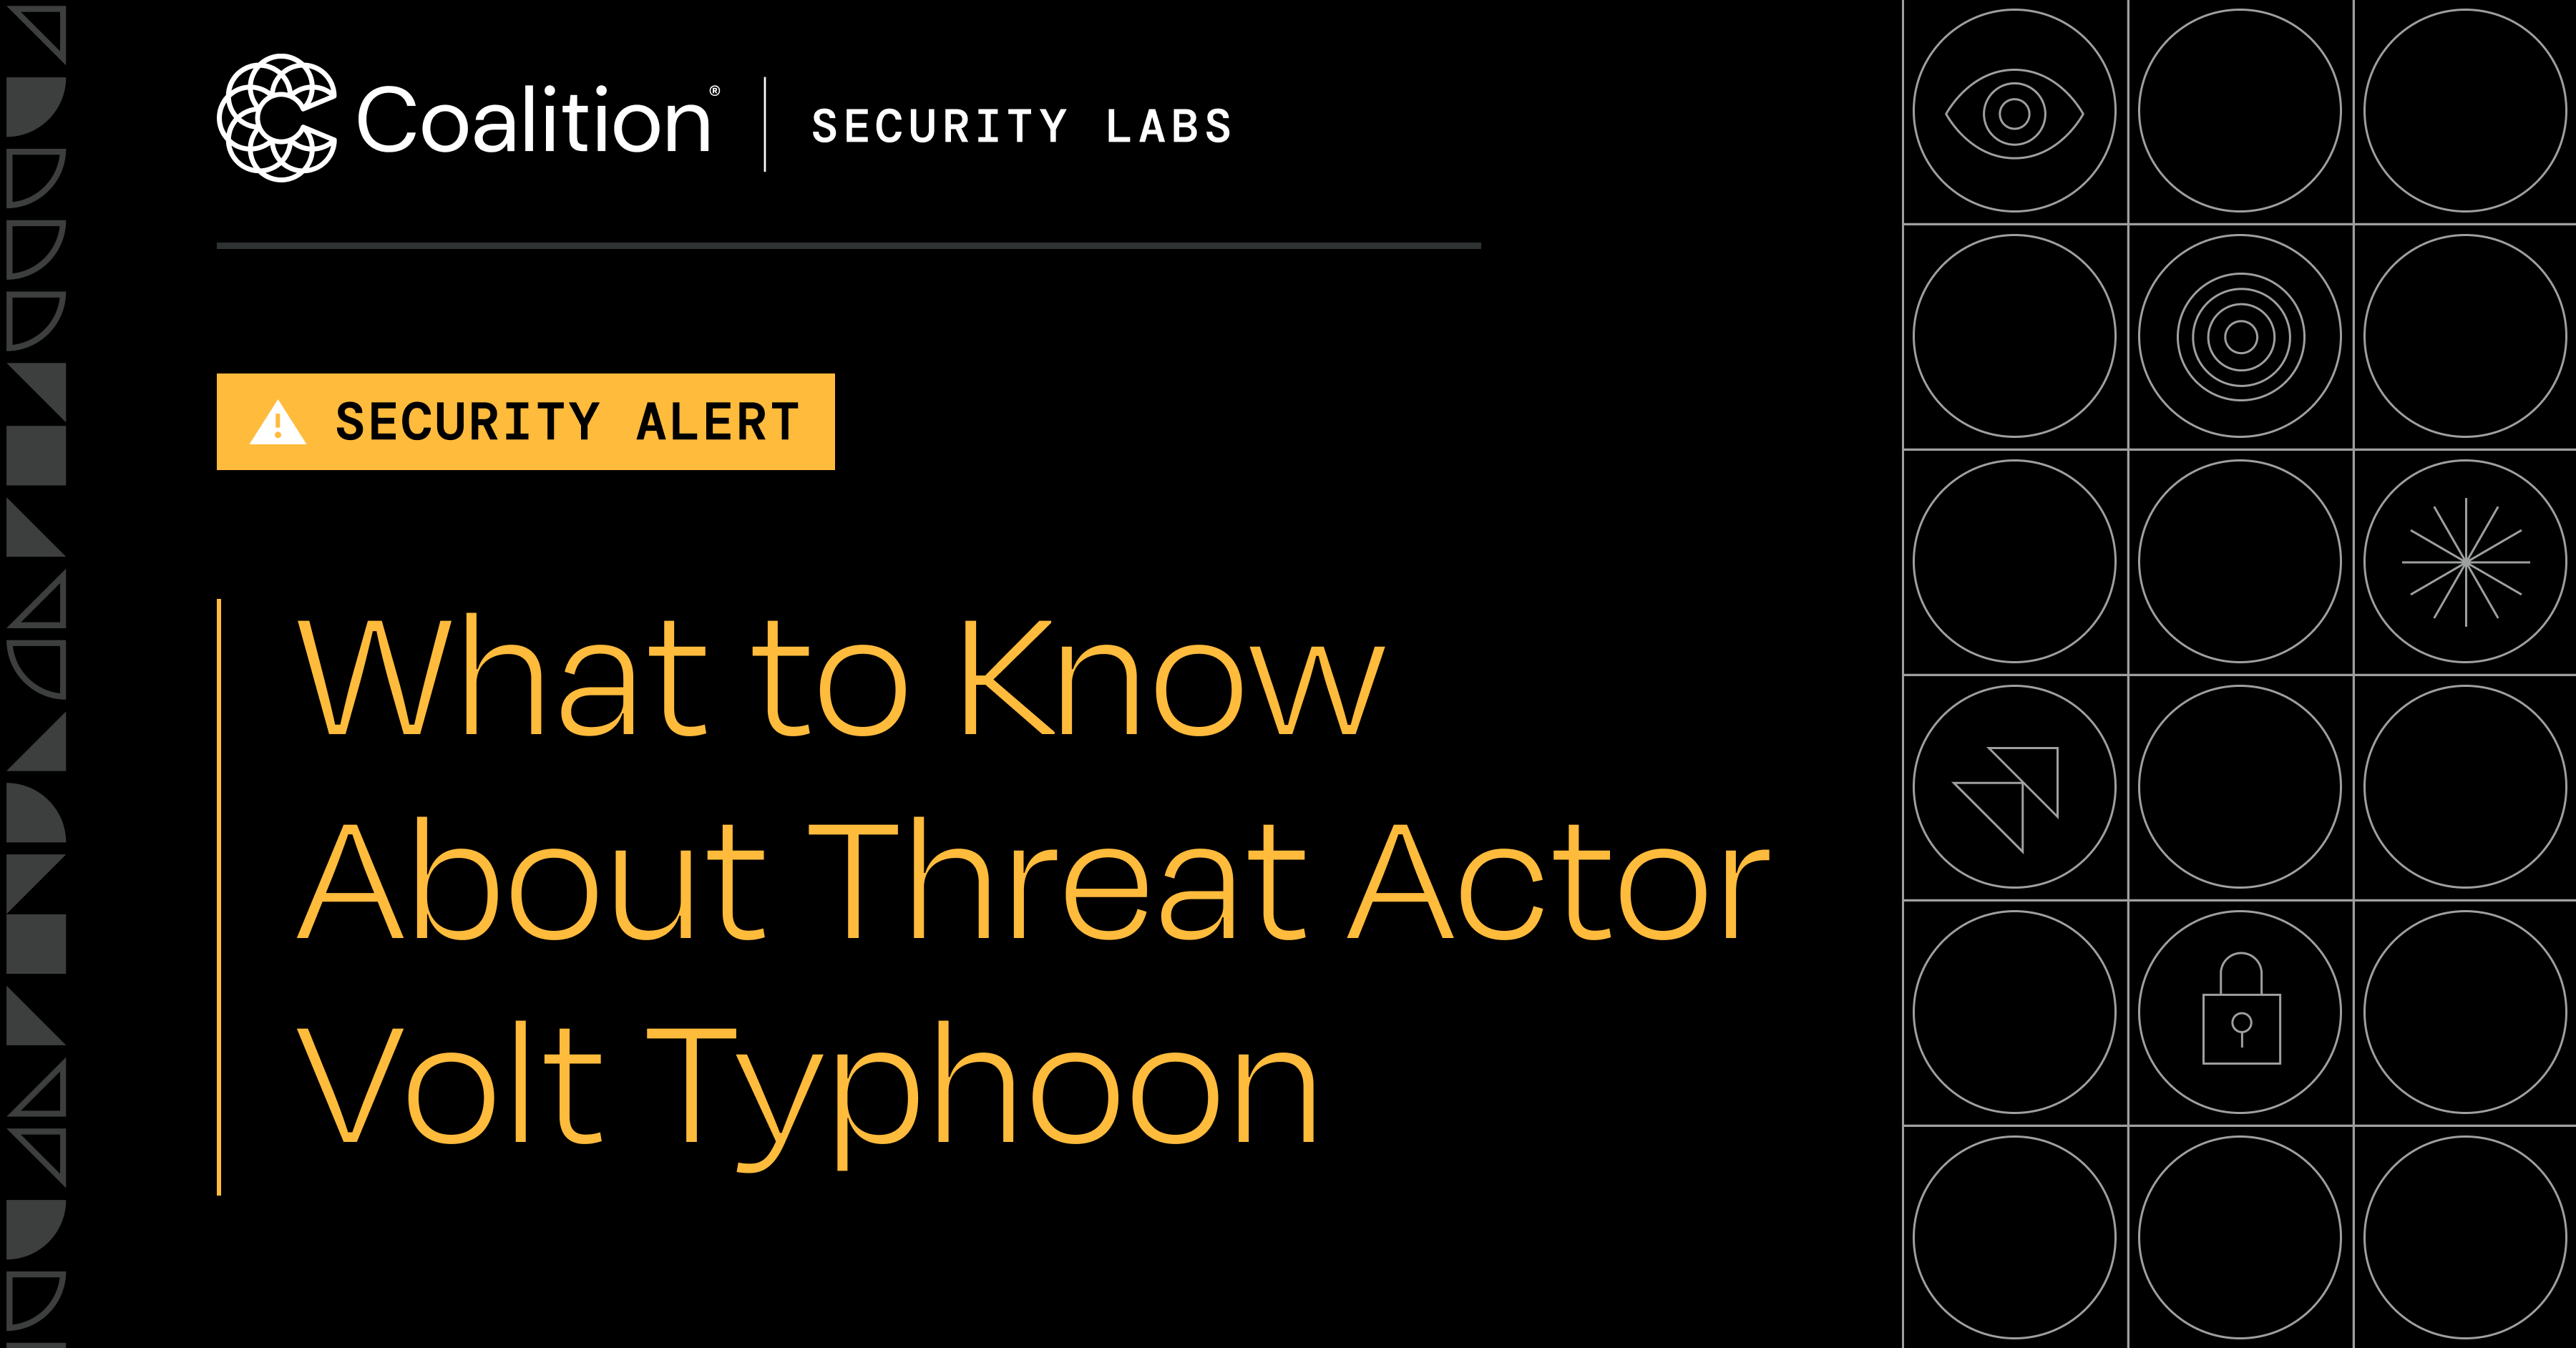 Coalition Blog SecLabs Security Alert: What to Know About Threat Actor Volt Typhoon